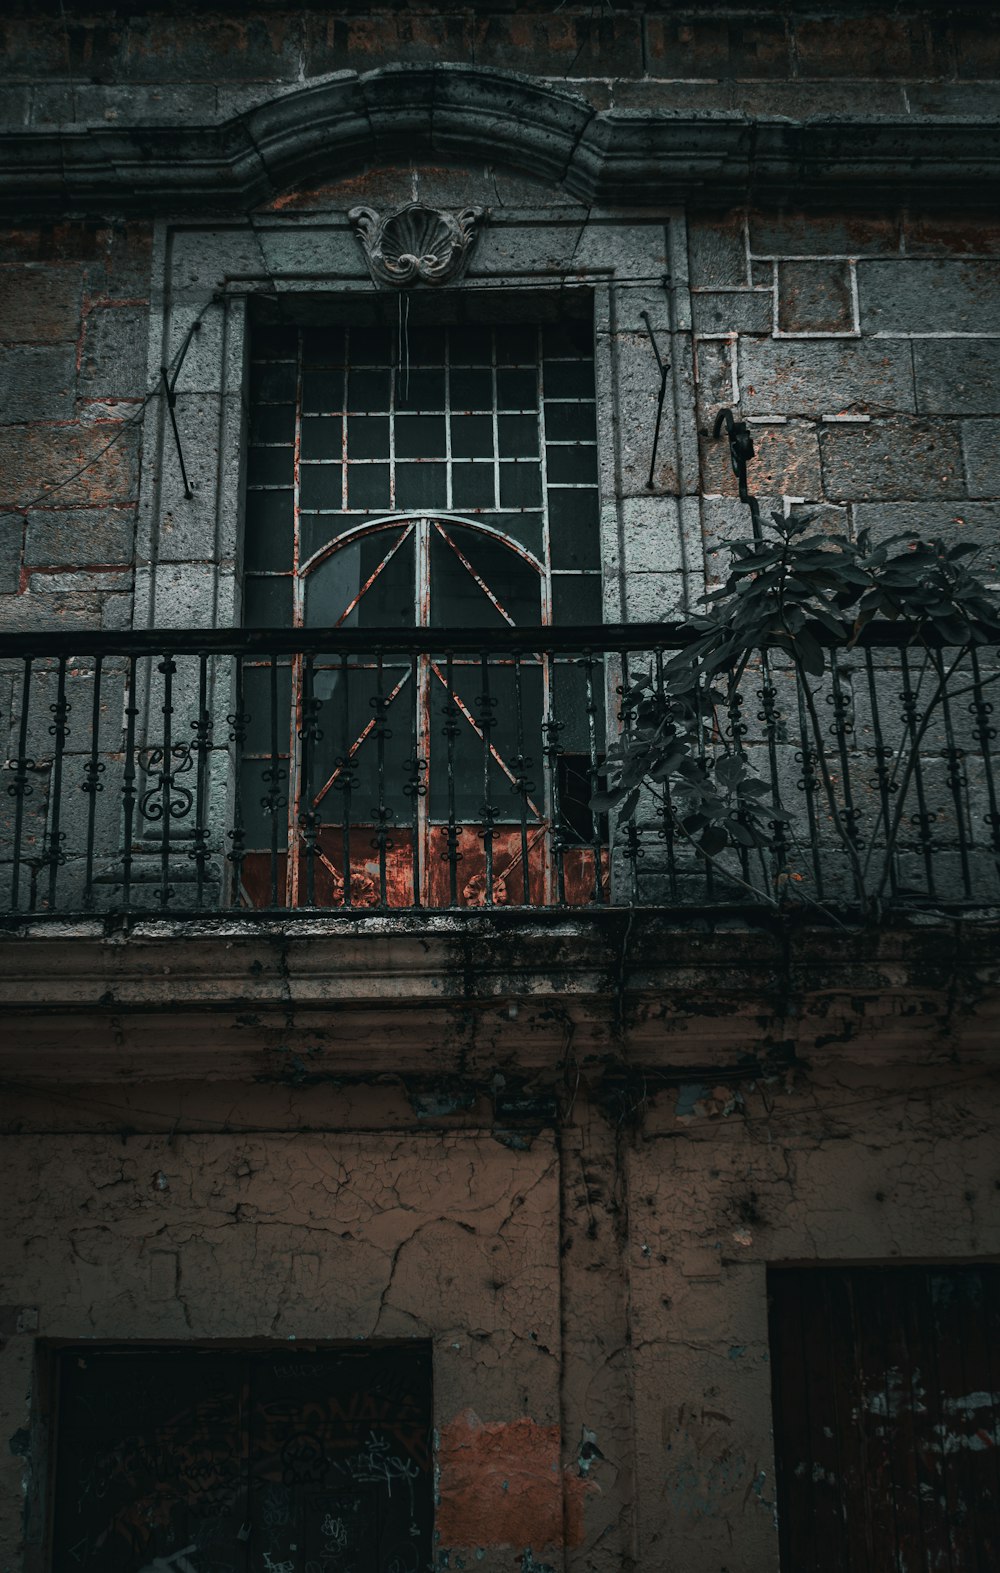 an old building with a wrought iron balcony